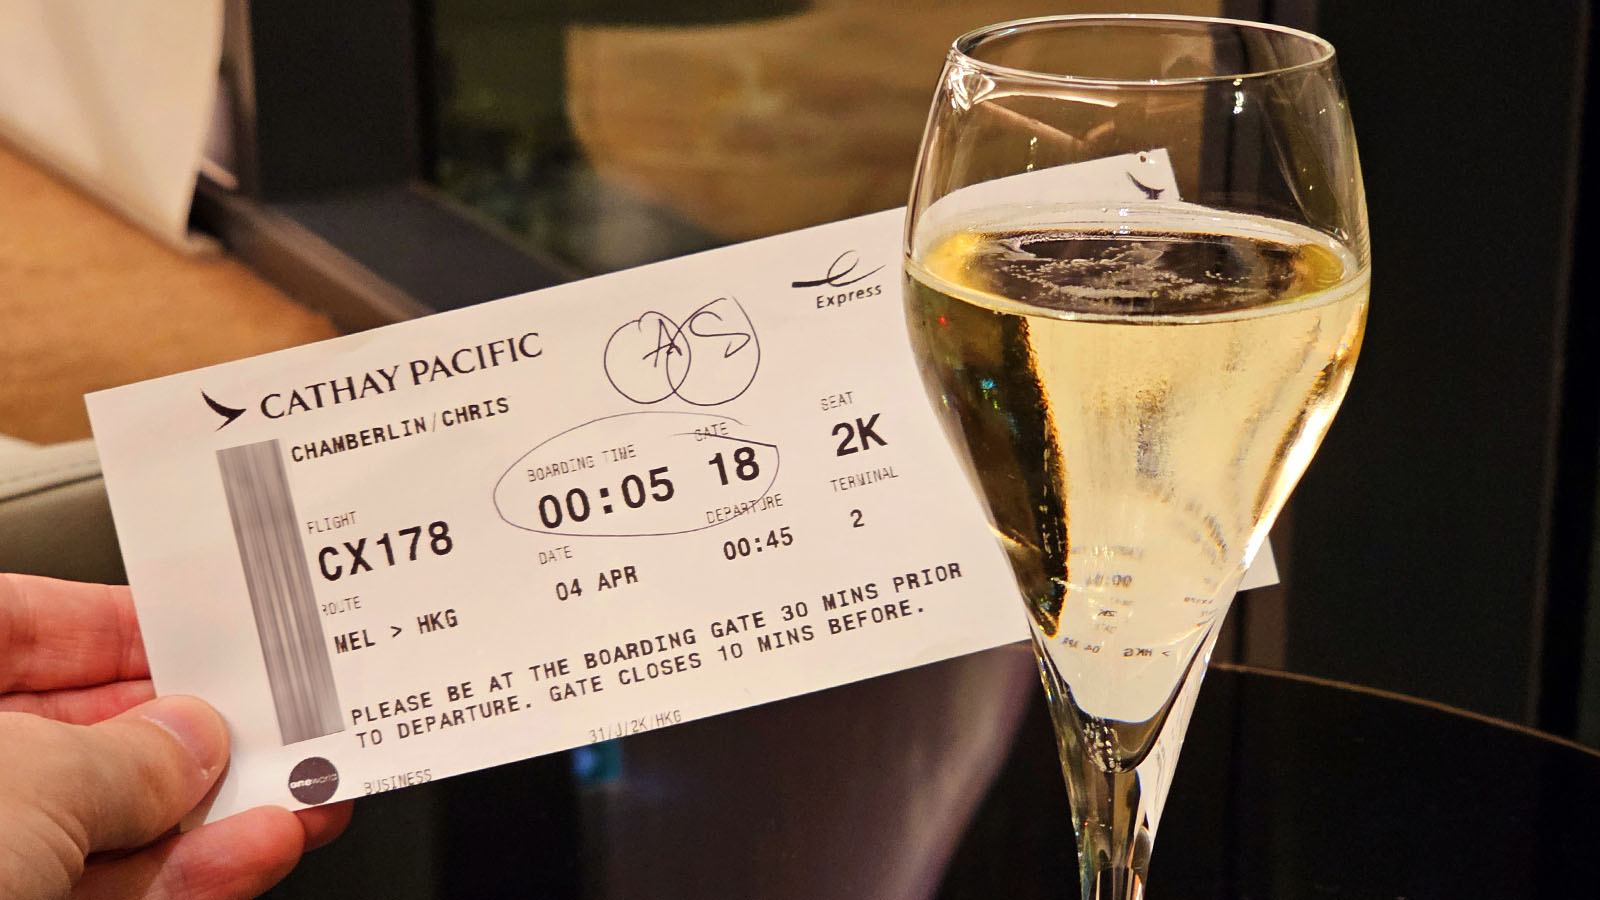 Cathay Pacific First Class boarding pass